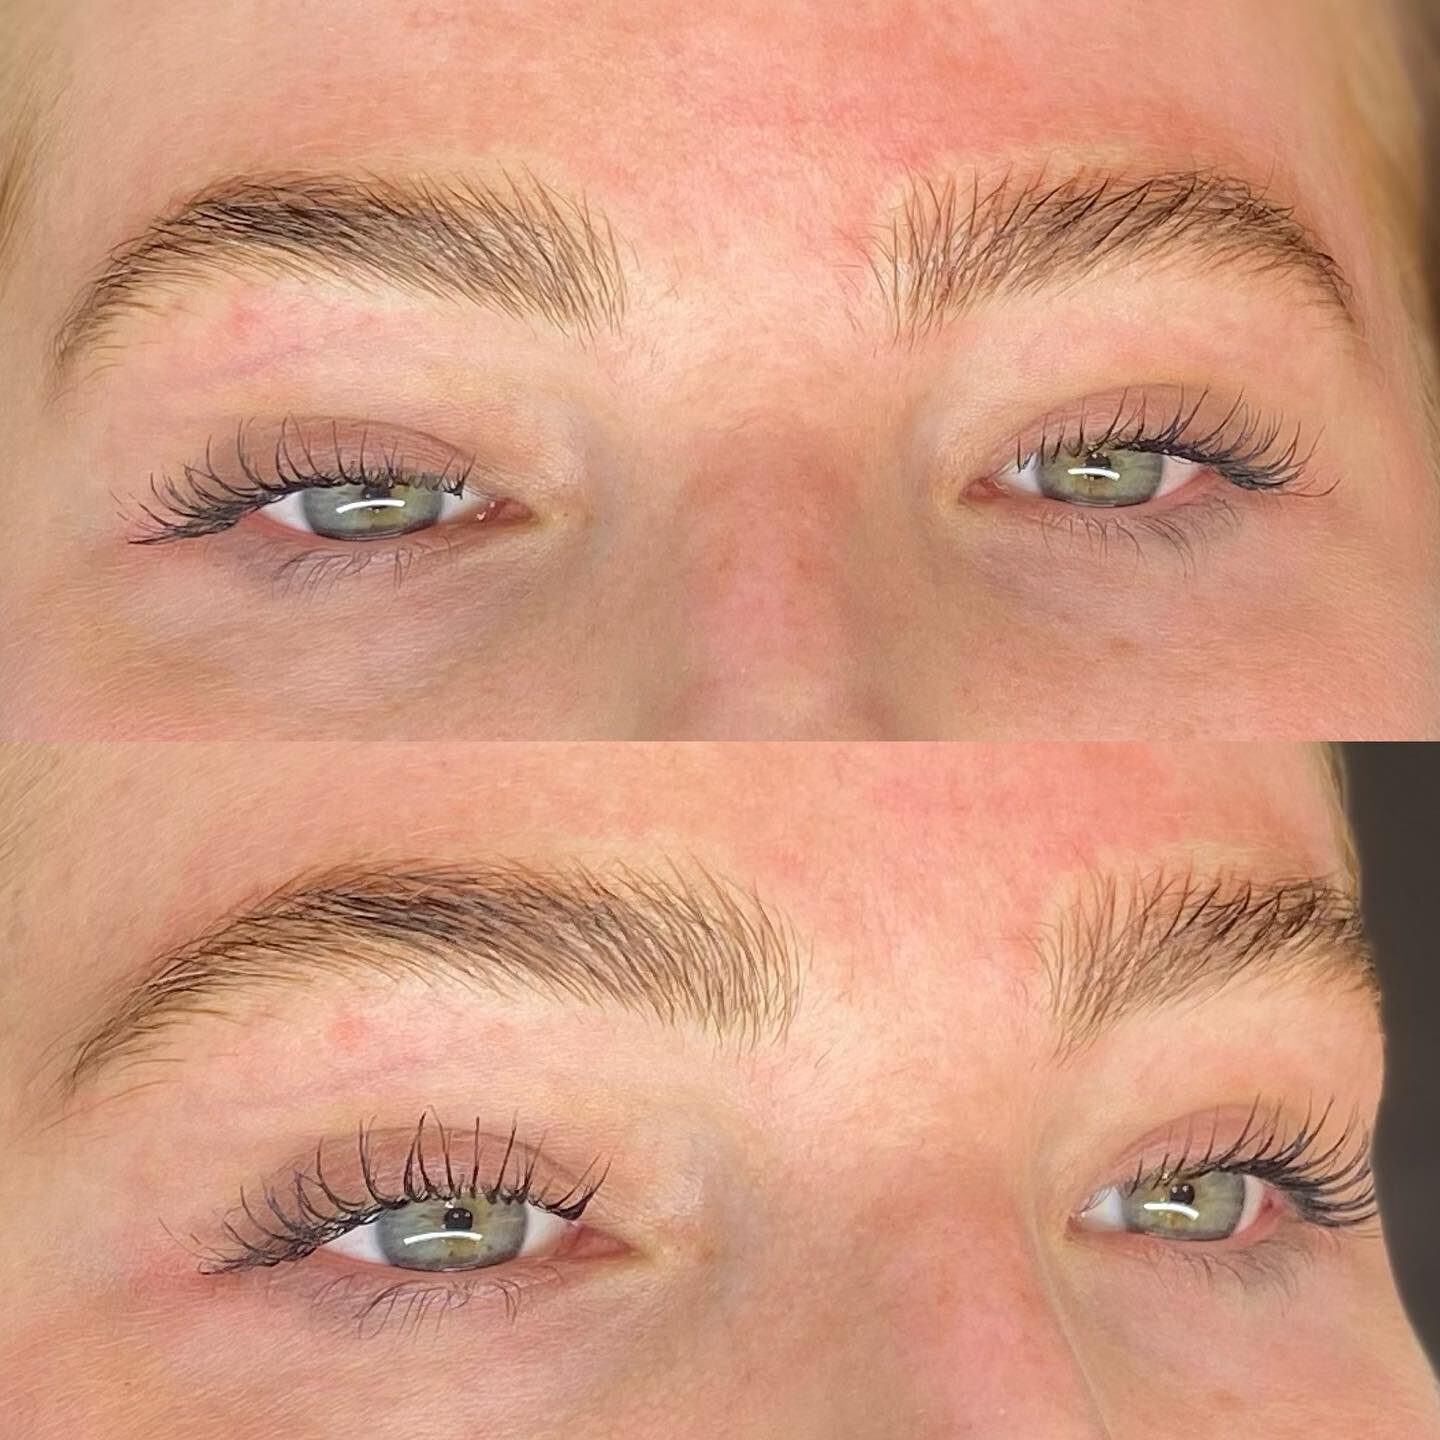 Beautiful first session of microblading. Swipe left to see her before. ✌️